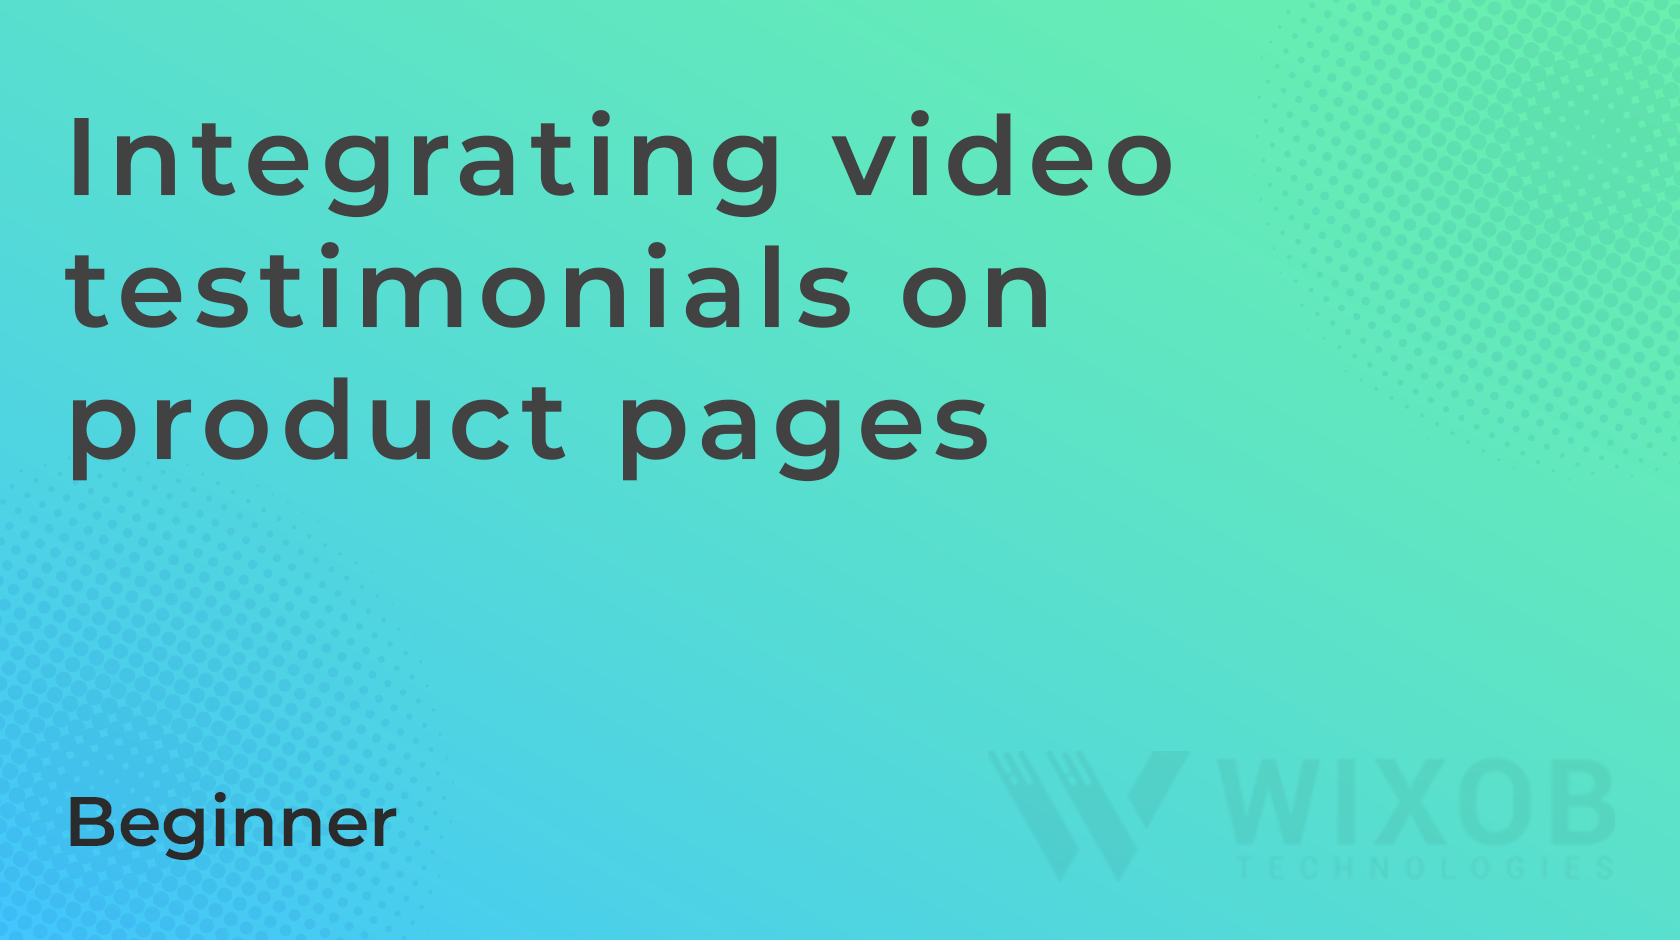 Integrating video testimonials on product pages